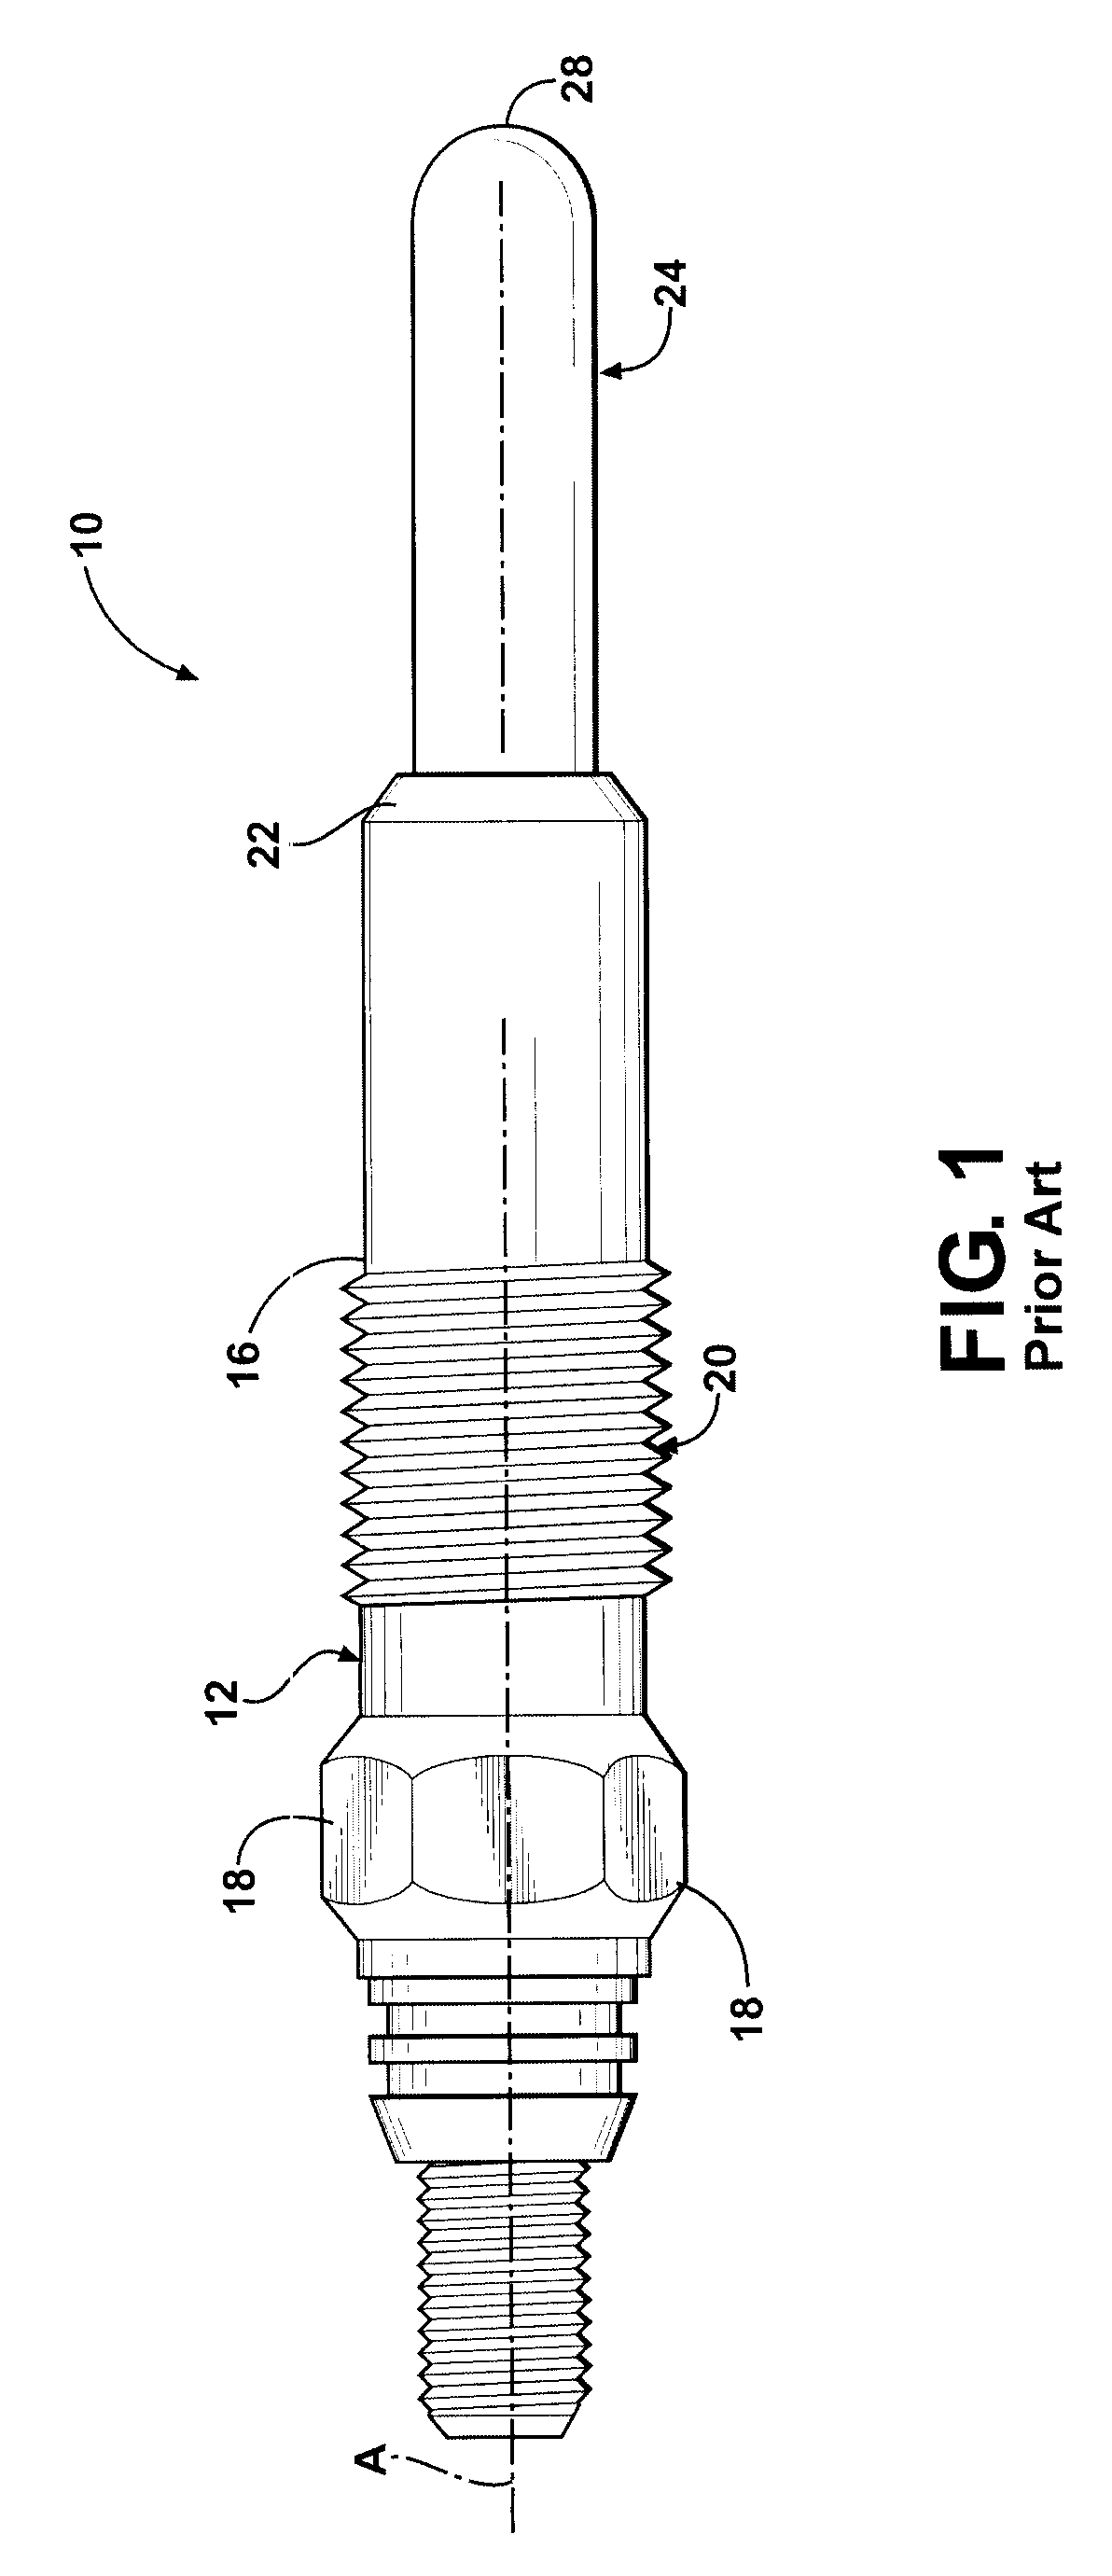 Glow plug with pressure sensing canister